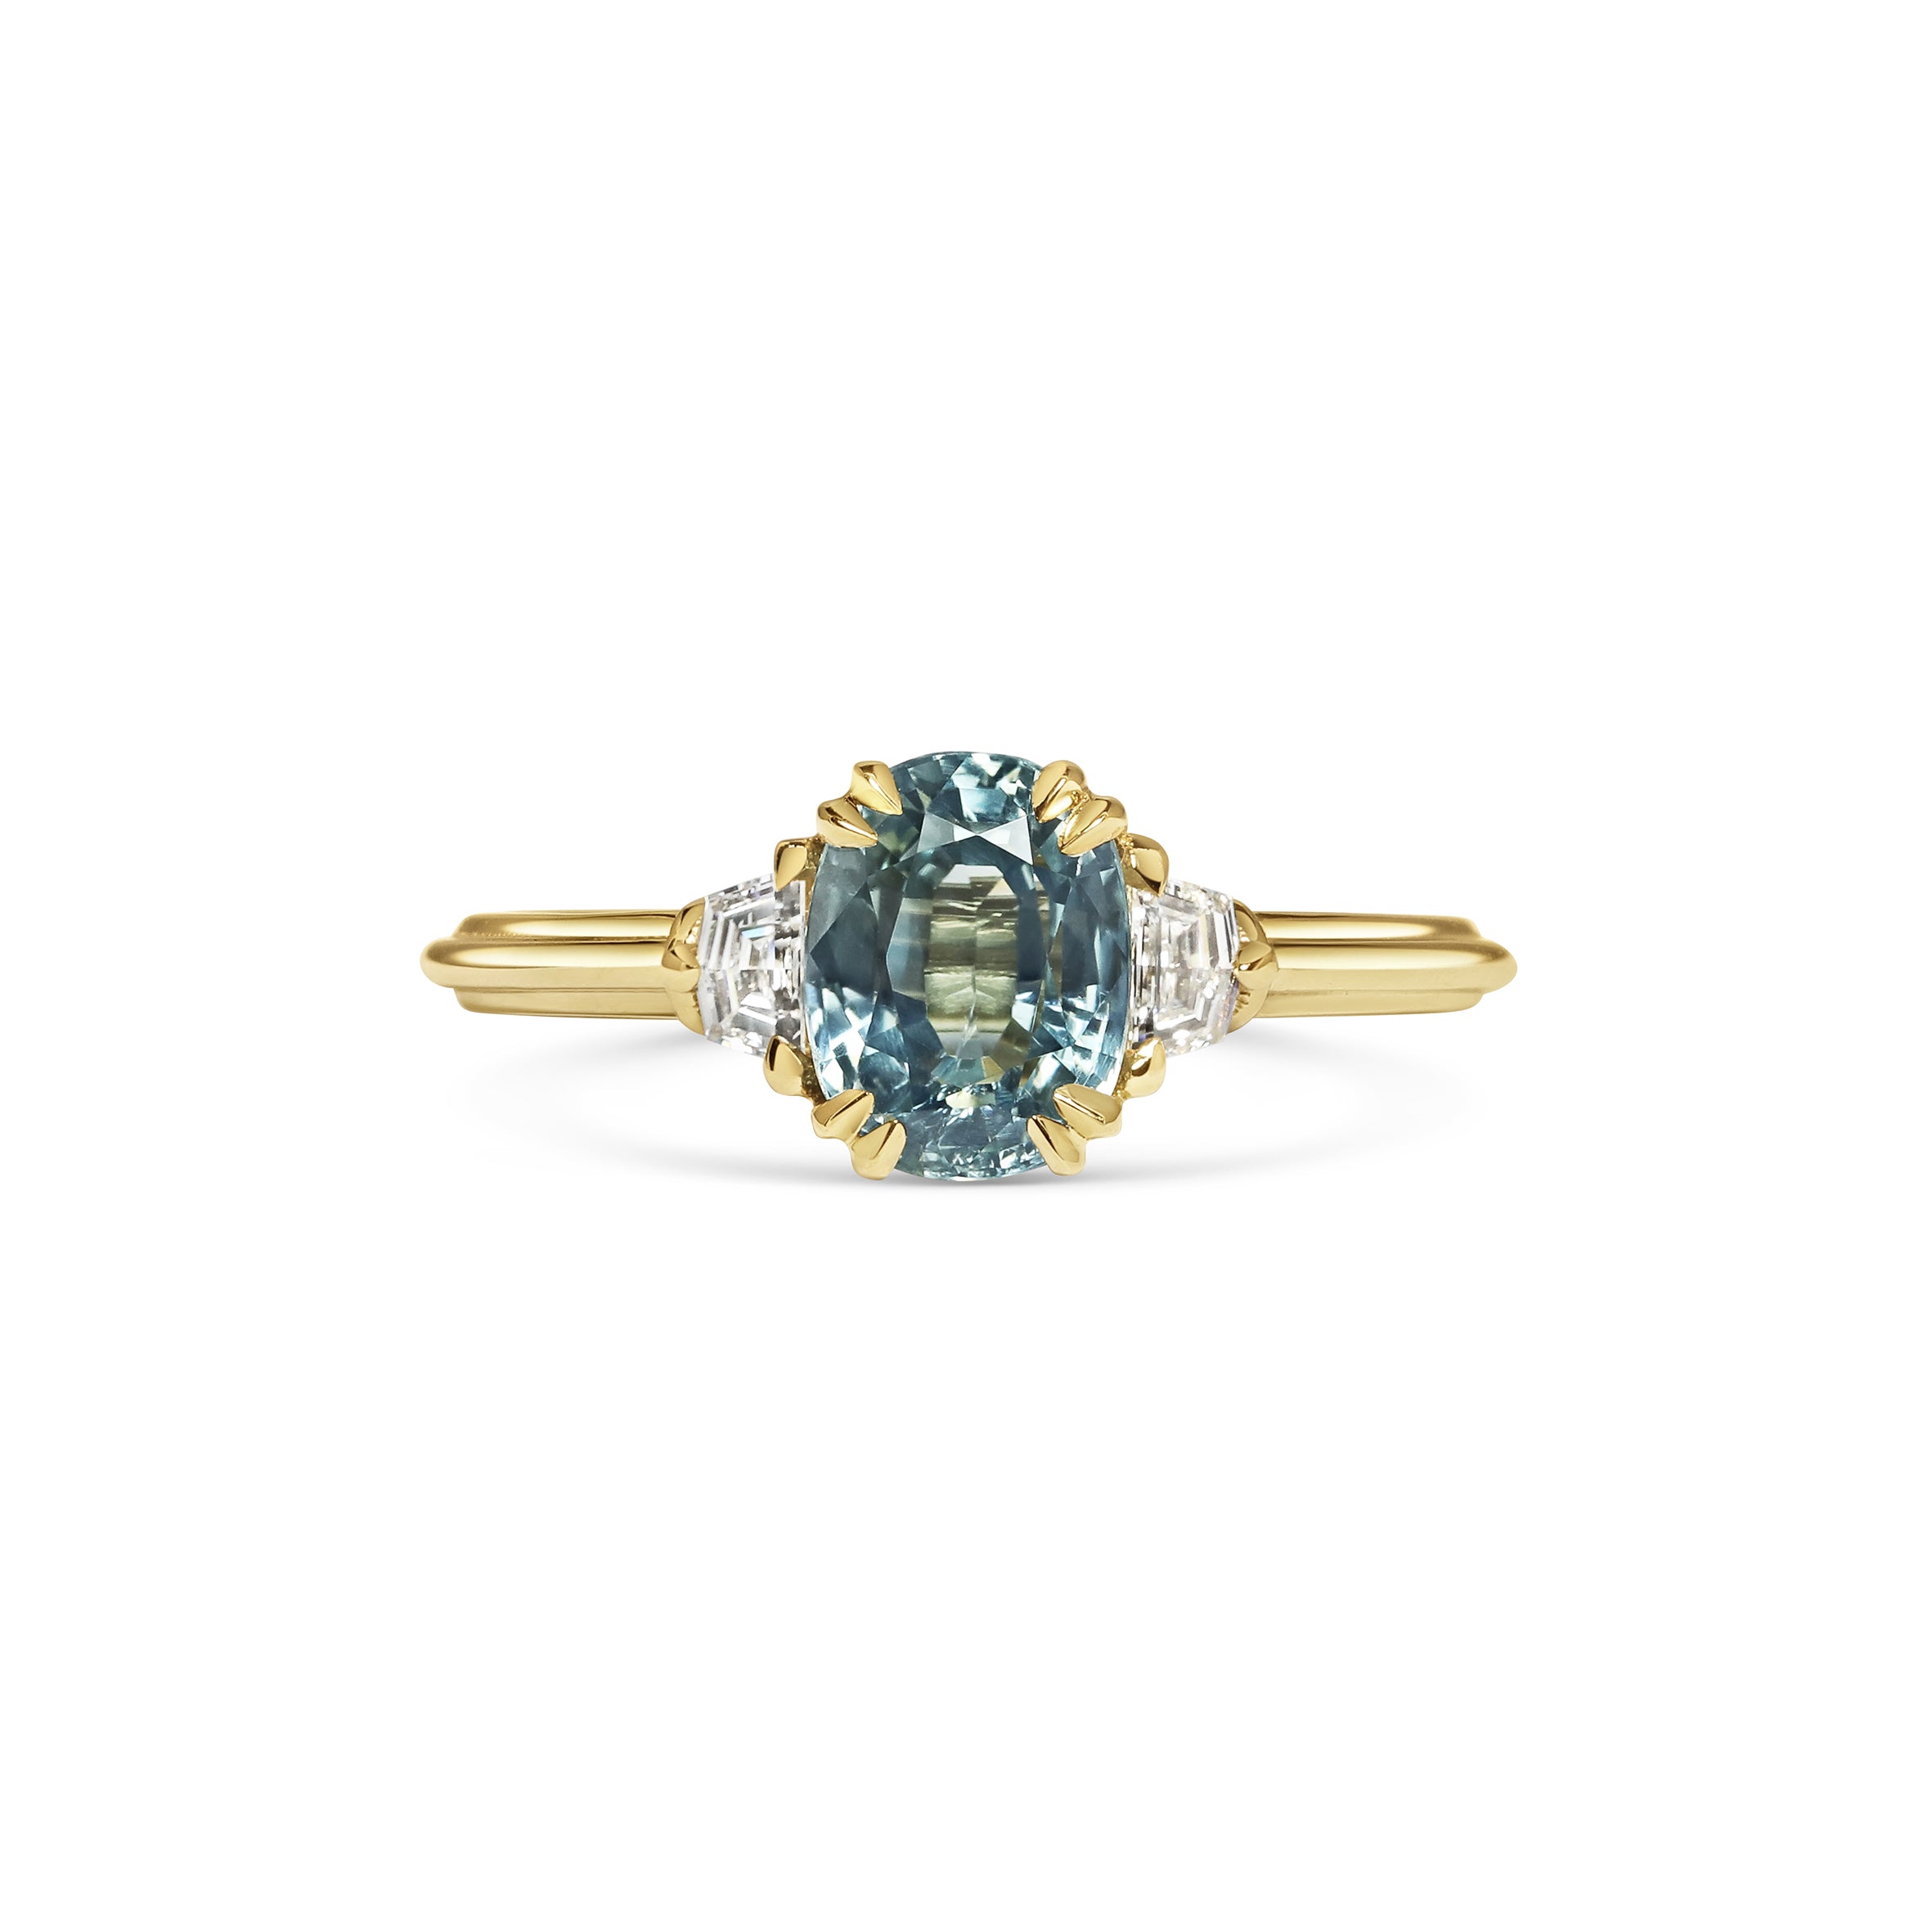 The Cristales Ring by East London jeweller Rachel Boston | Discover our collections of unique and timeless engagement rings, wedding rings, and modern fine jewellery.